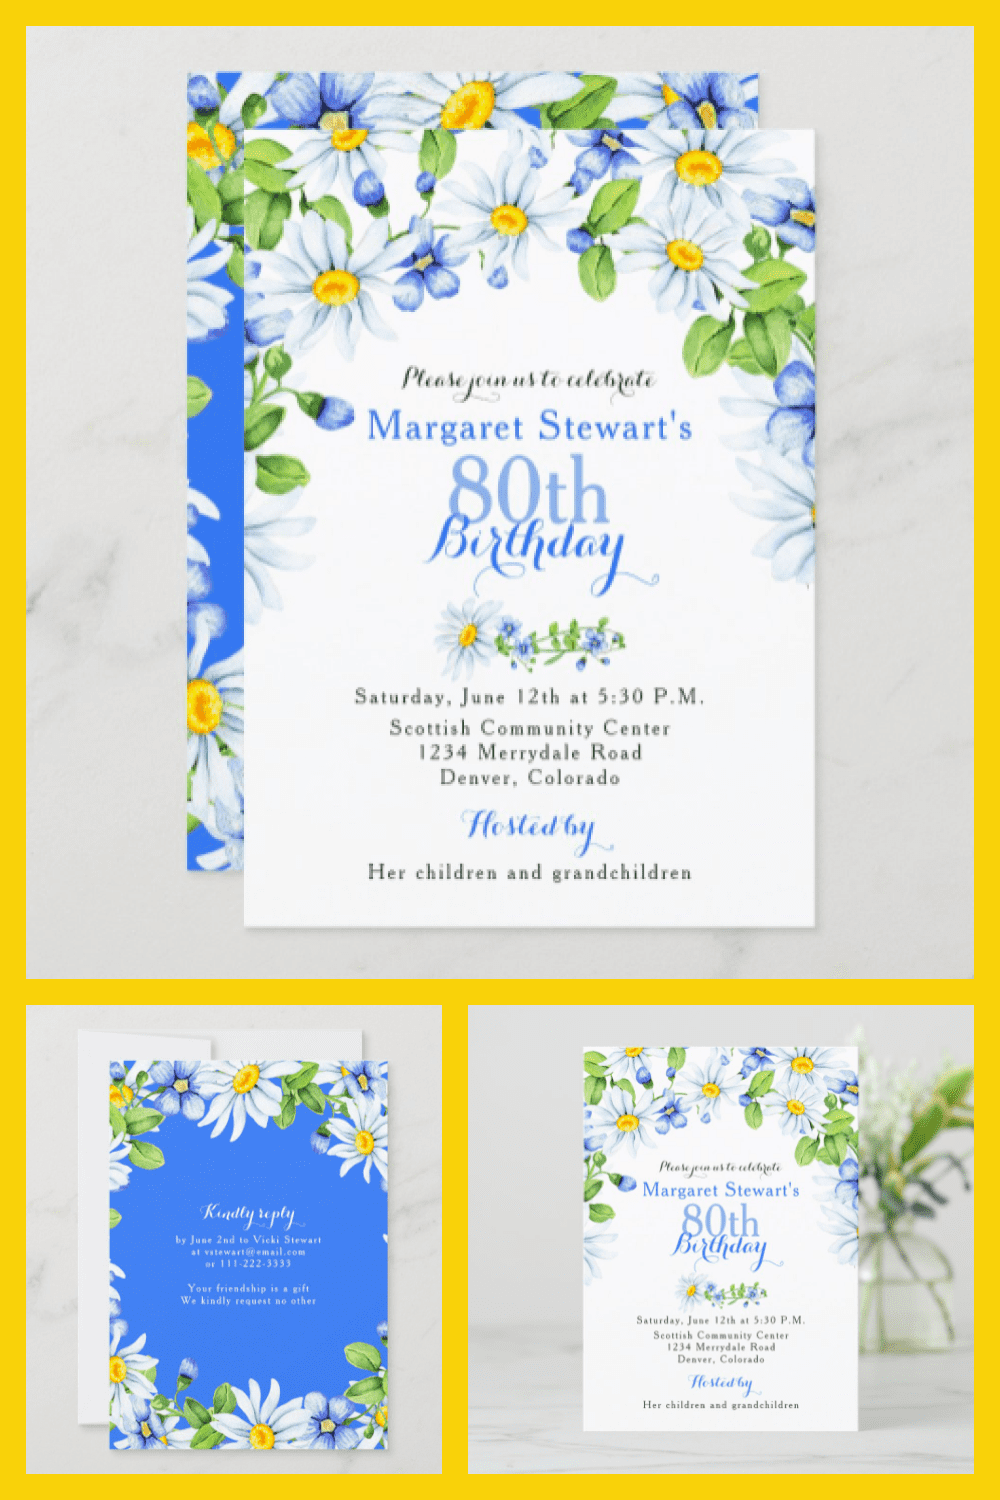 Fresh and light invitation for birthday party.